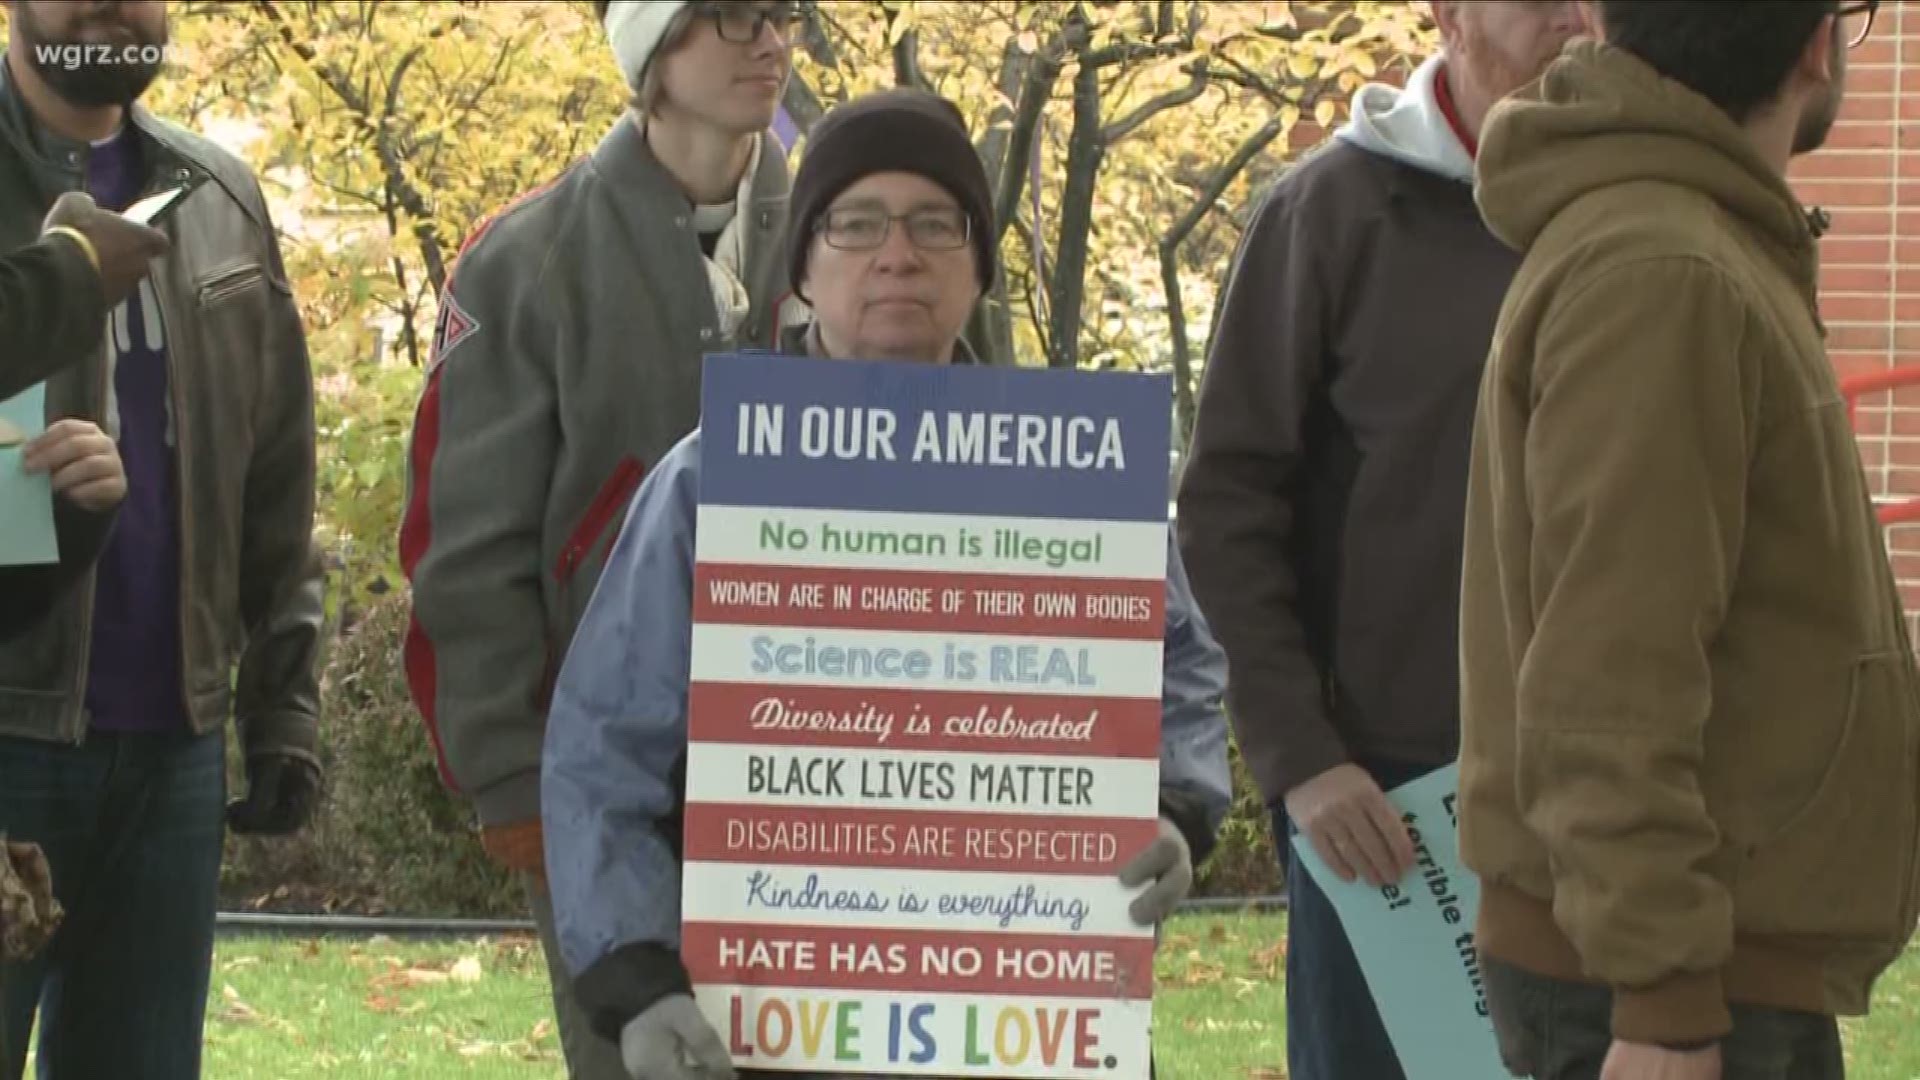 A coalition of religious, governmental, and community leaders gathered together Tuesday morning to rally for the rights of LGBTQ communities in Buffalo.